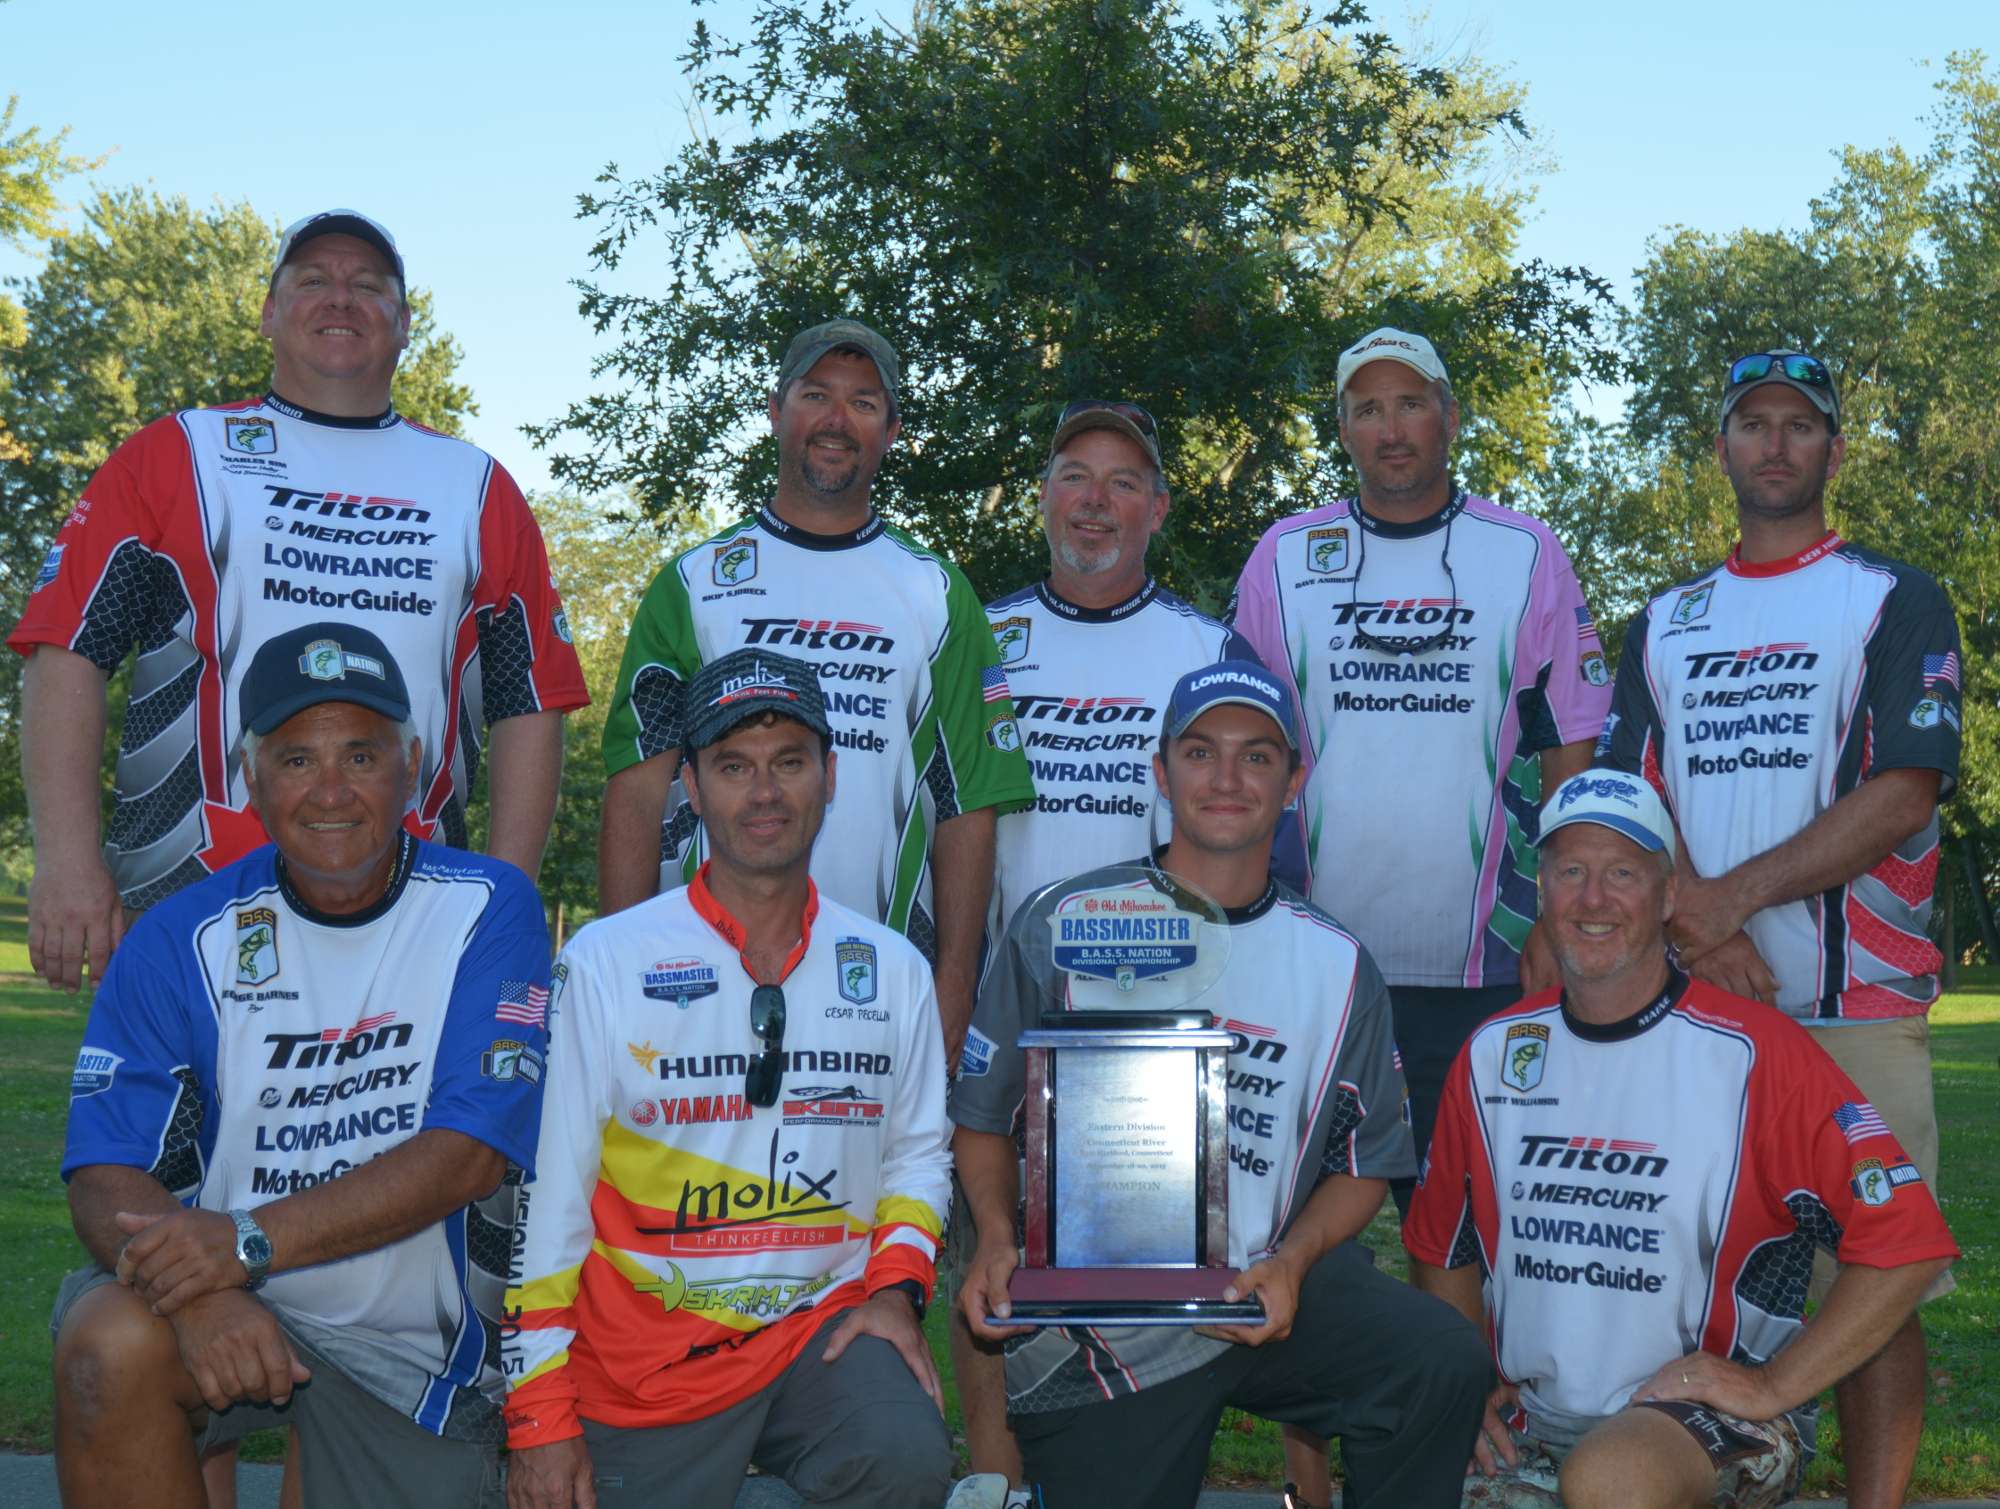 For the last several months, anglers have been working through their respective ranks to qualify for the 2015 Old Milwaukee B.A.S.S. Nation Championship, which is coming up Nov. 5-7 on Louisiana's Ouachita River. A total of 59 competitors have earned a berth in the championship. Most won their invitation by finishing at the top in their state at a B.A.S.S. Nation divisional. A few international qualifiers earned their spot by winning a championship in their nation. One â Paul Mueller â will return to defend his title from last year's championship, and the final qualifier â Jack Barber â won his ticket by winning Angler of the Year on the Paralyzed Veterans of America Tour. Meet the contenders in the next few slides. Six of them will win their divisions in the championship and qualify to compete in the 2016 GEICO Bassmaster Classic presented by GoPro.